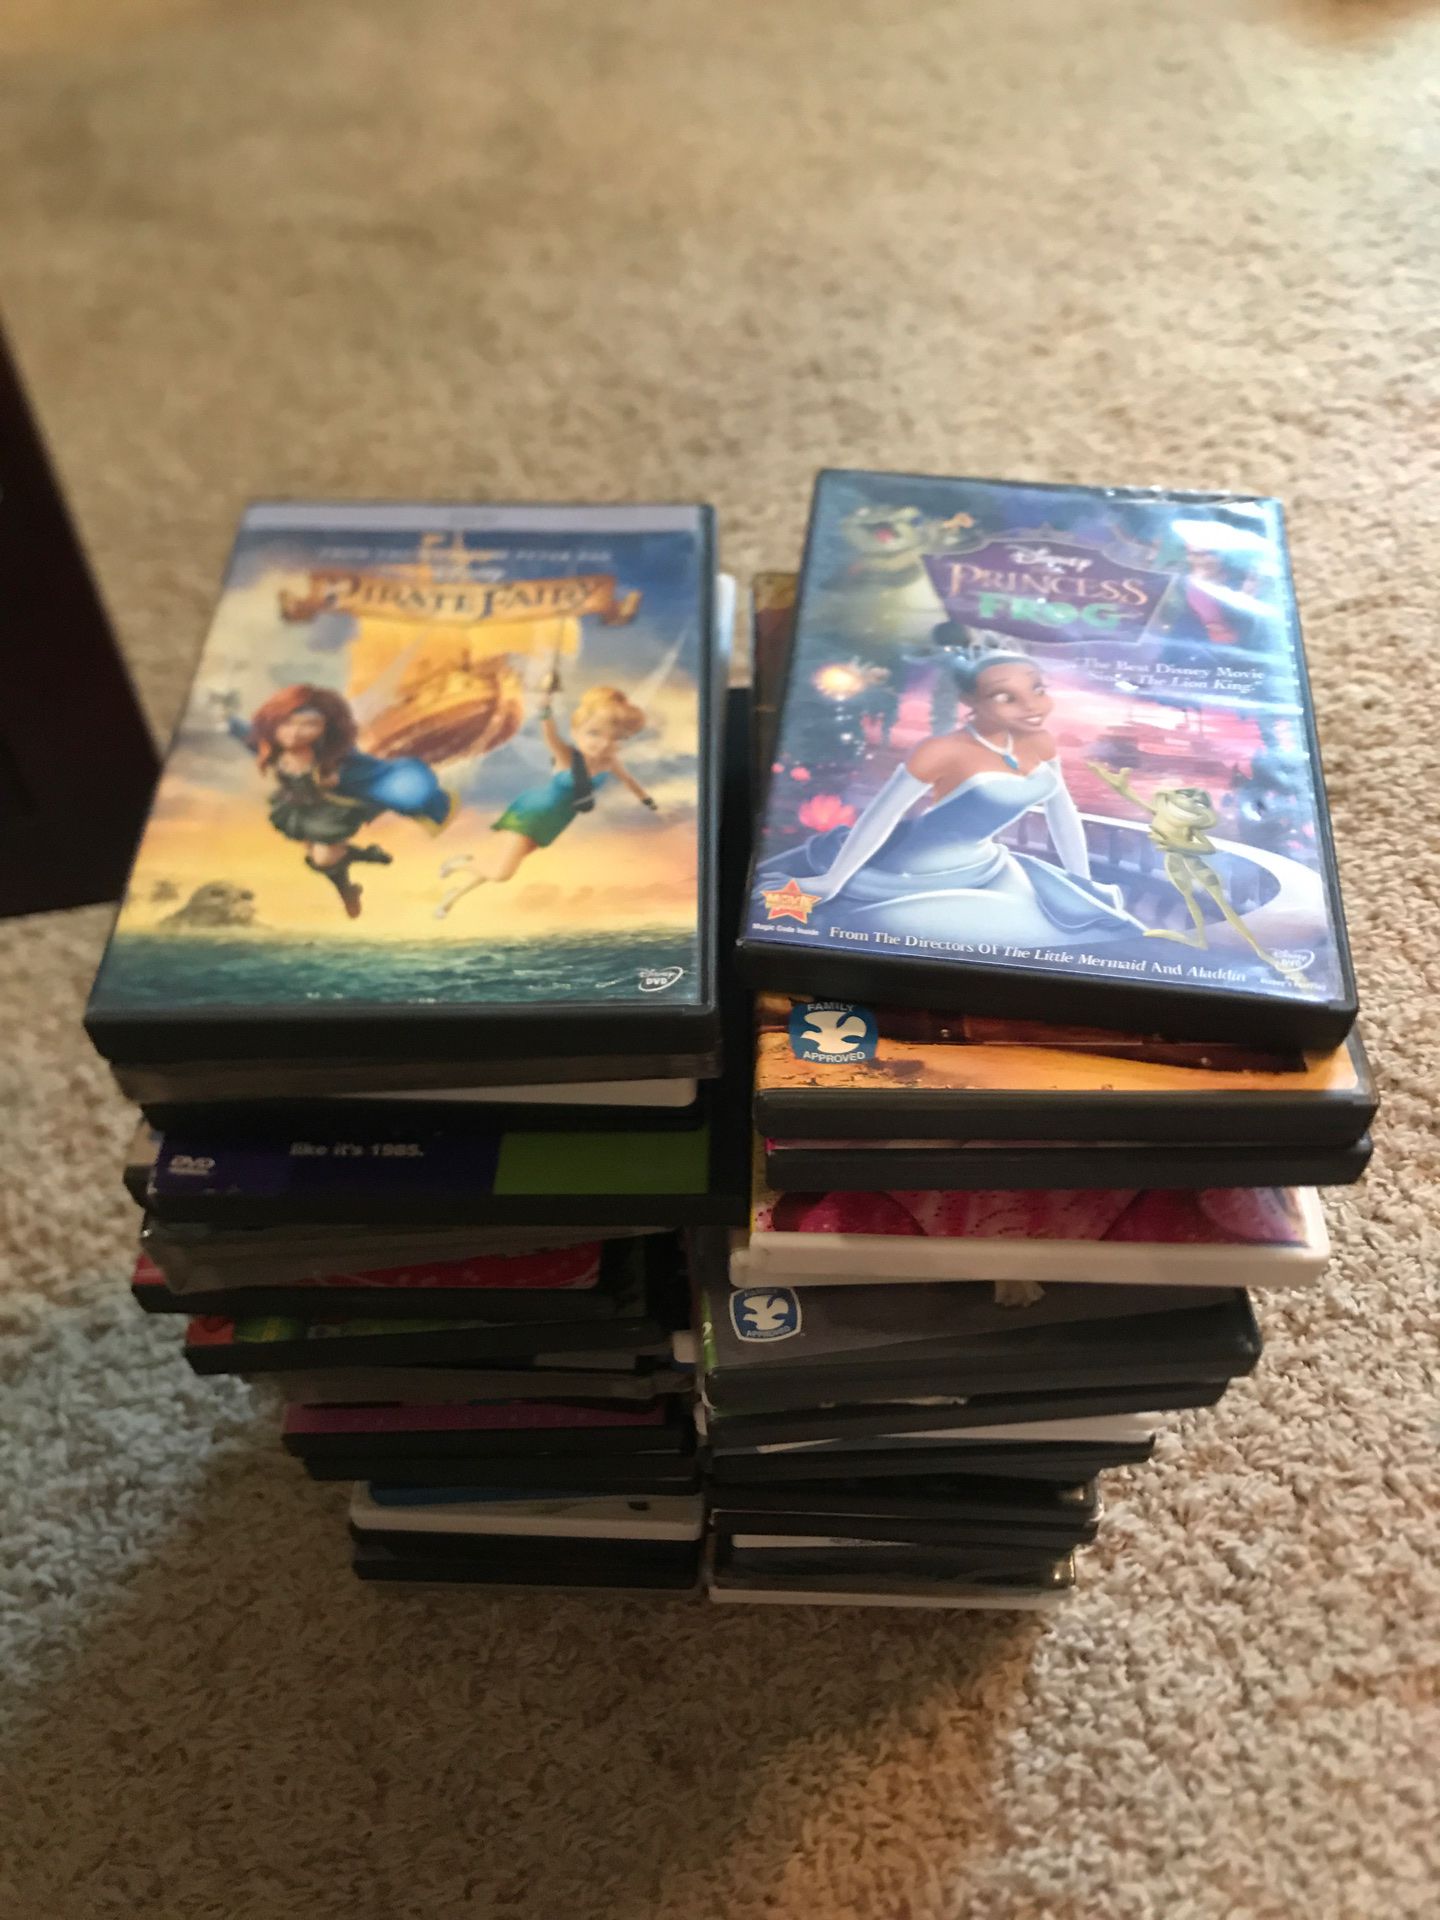 60 dvd movies. All appropriate mix of kids and family movies